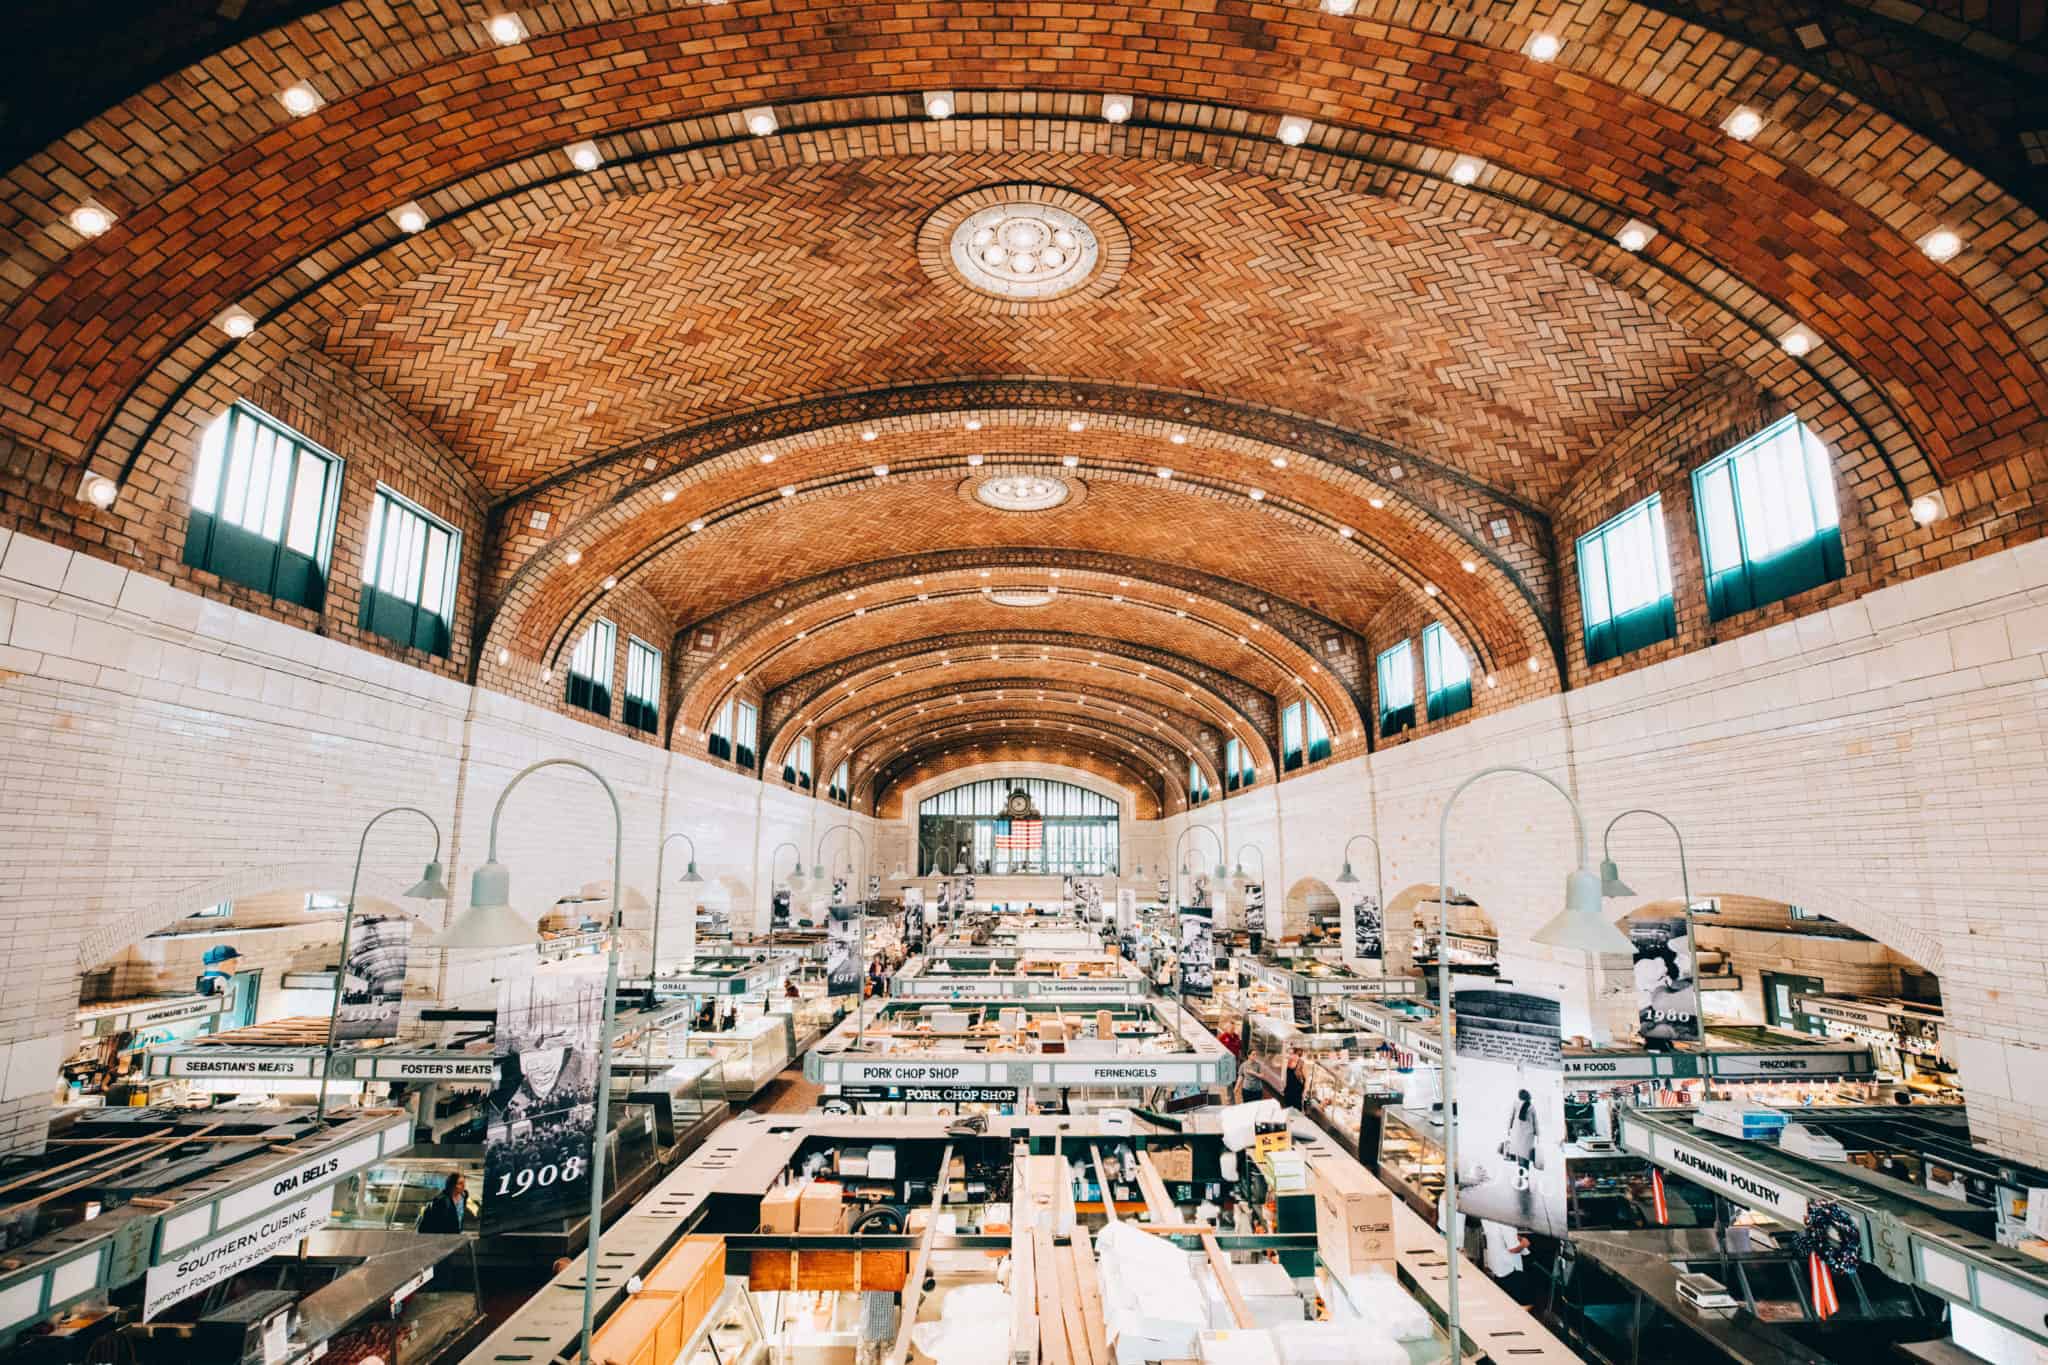 20 Must-See Instagram Spots In Cleveland, Ohio To Snap The Best Pictures